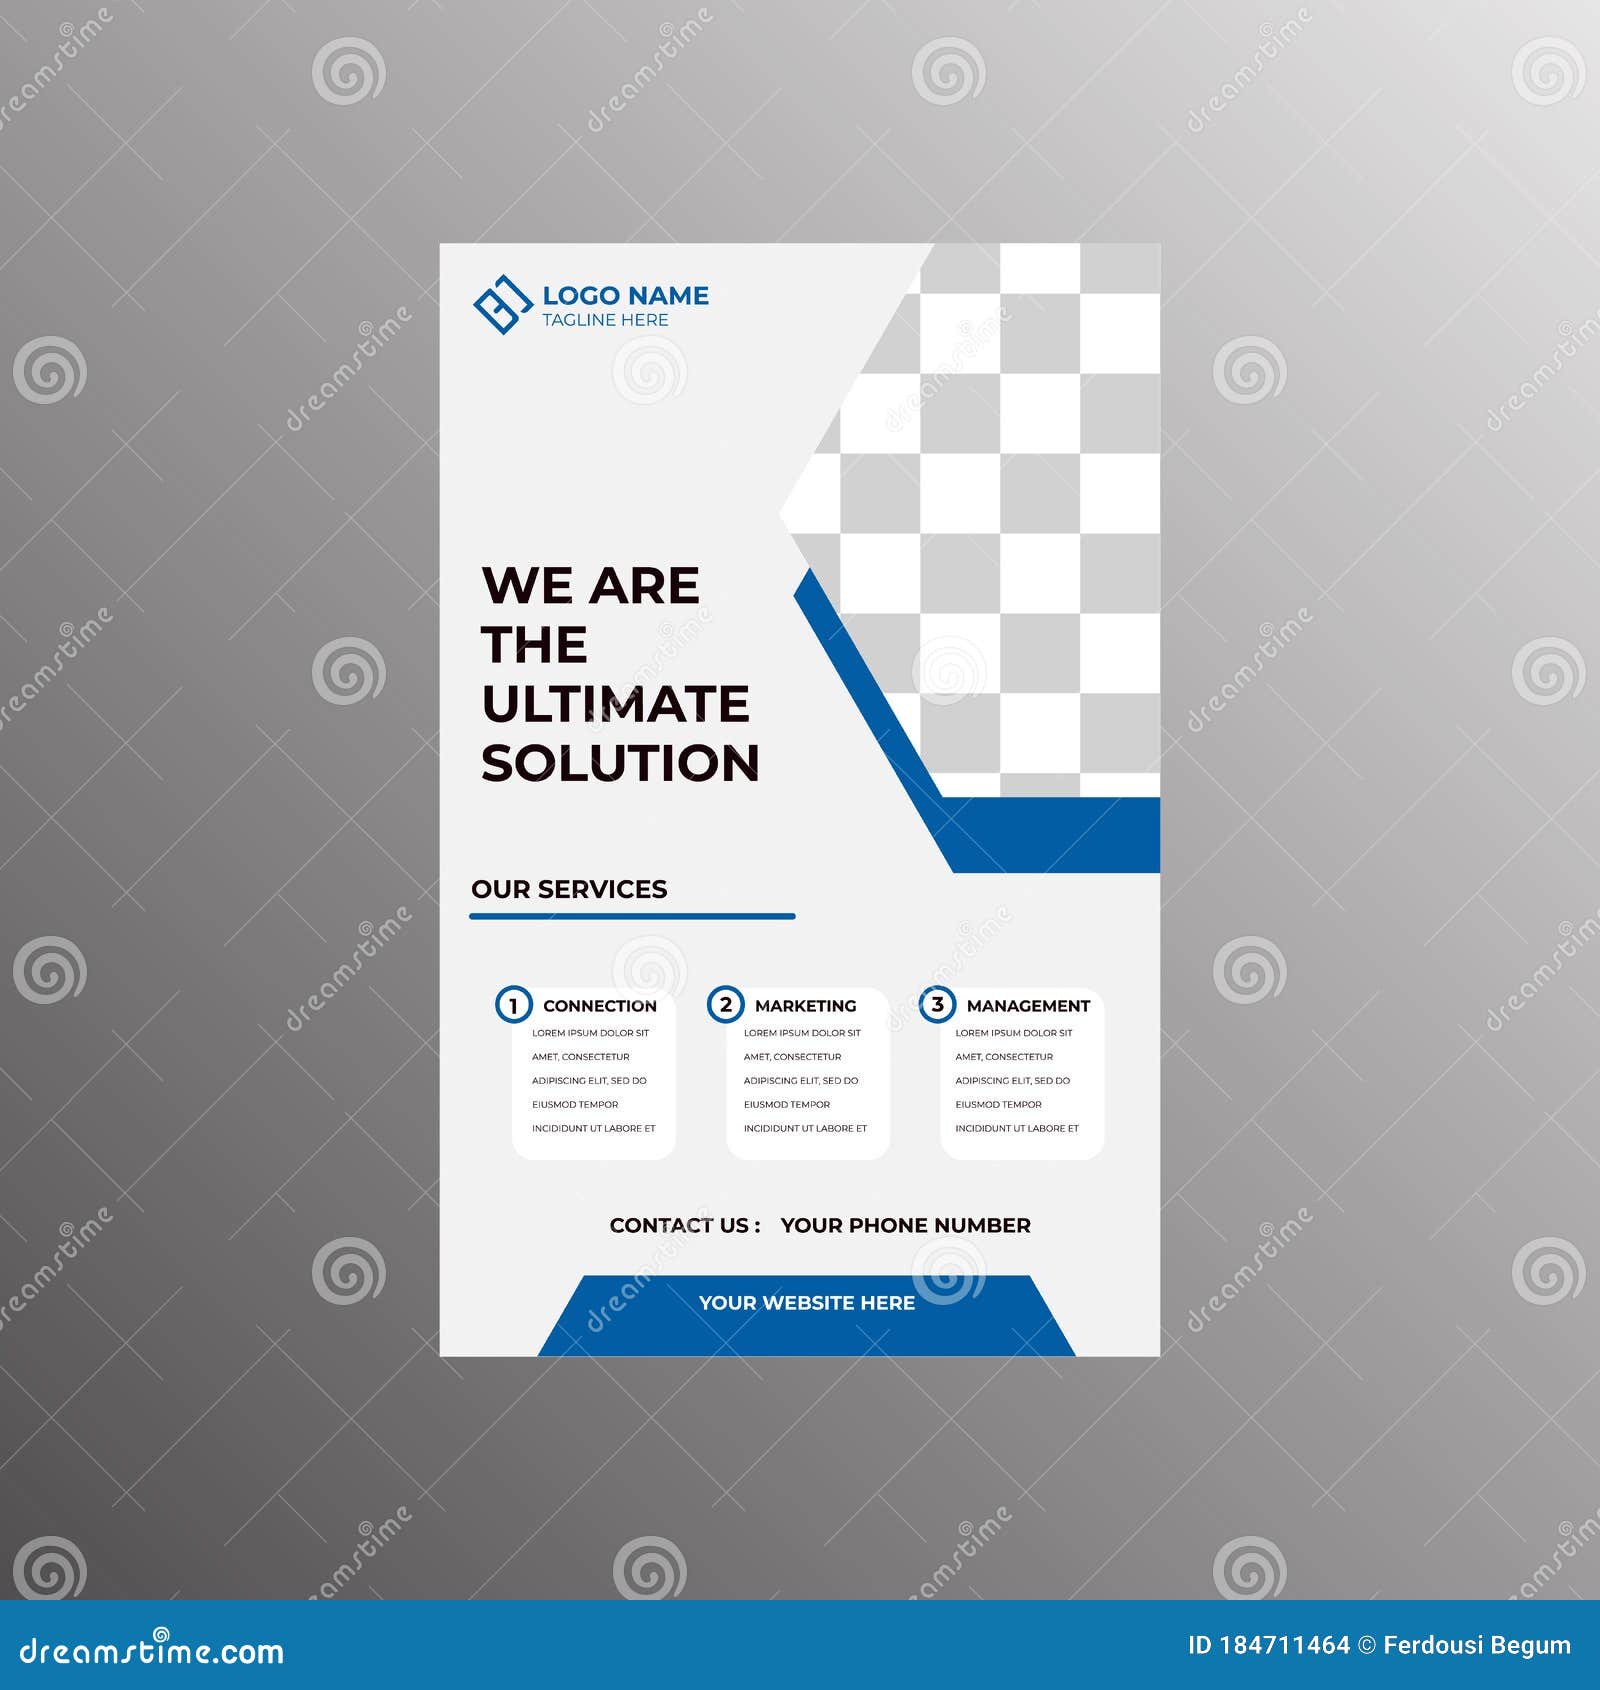 Corporate Business Flyer Poster Pamphlet Brochure Cover Design Layout  Background, Two Colors Scheme, Template in A4 Size - Stock Illustration -  Illustration of creative, report: 184711464